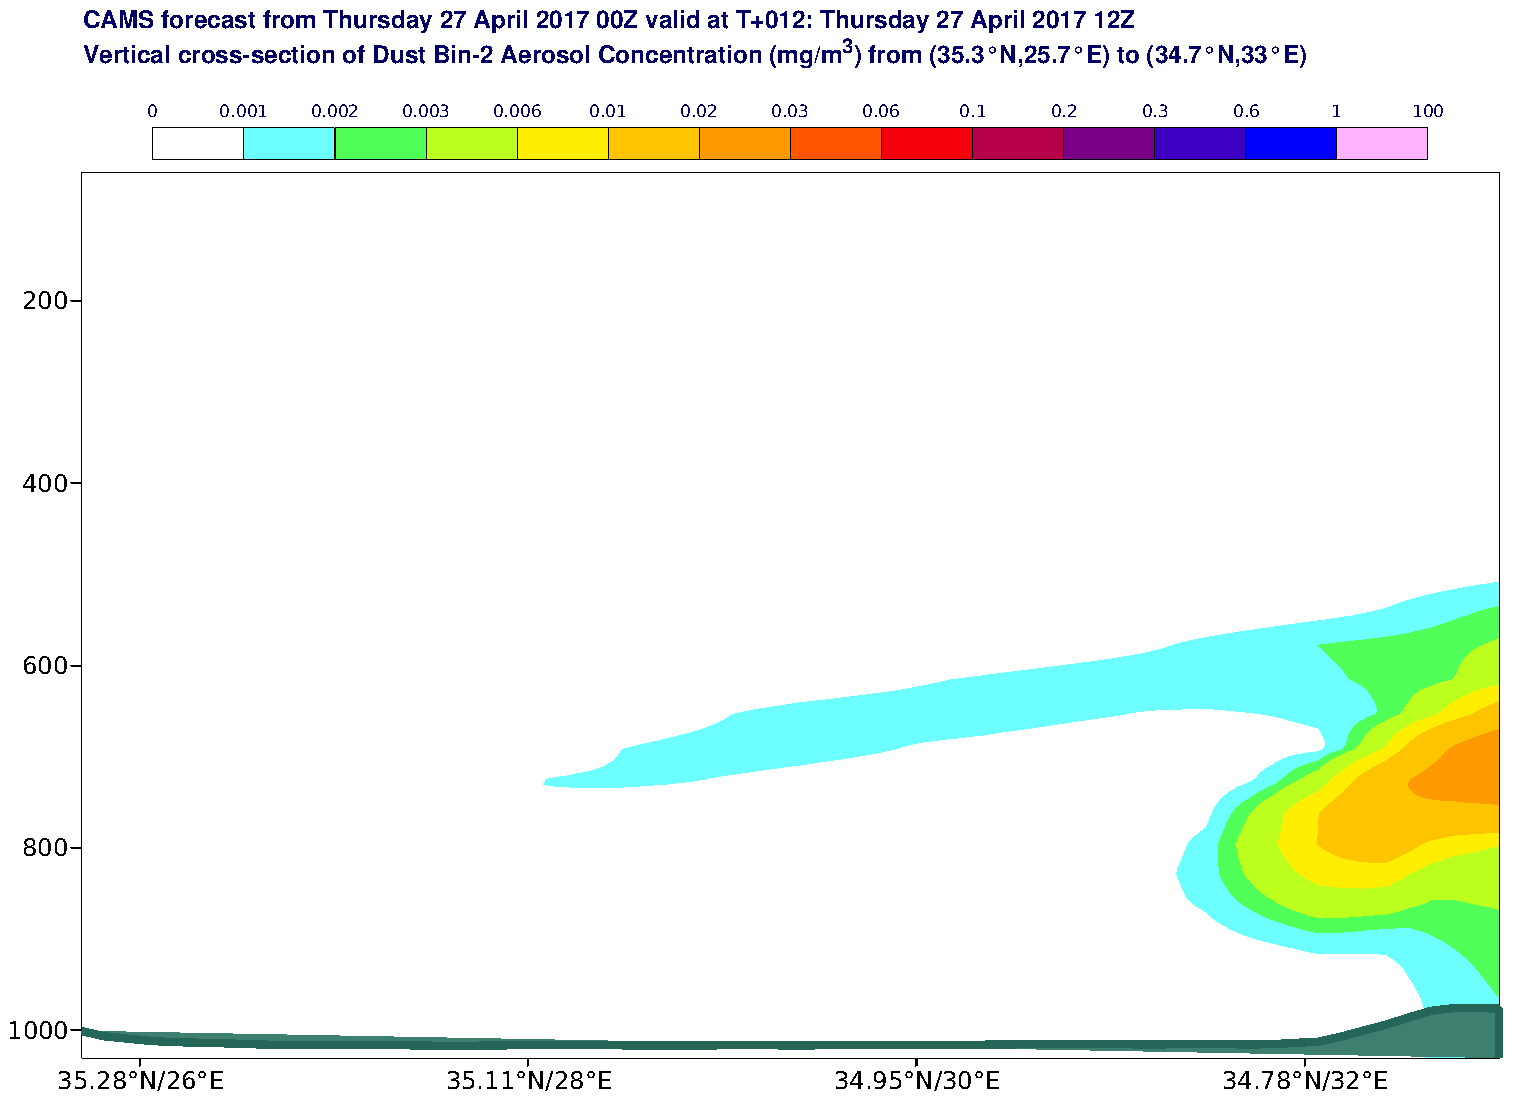 Vertical cross-section of Dust Bin-2 Aerosol Concentration (mg/m3) valid at T12 - 2017-04-27 12:00